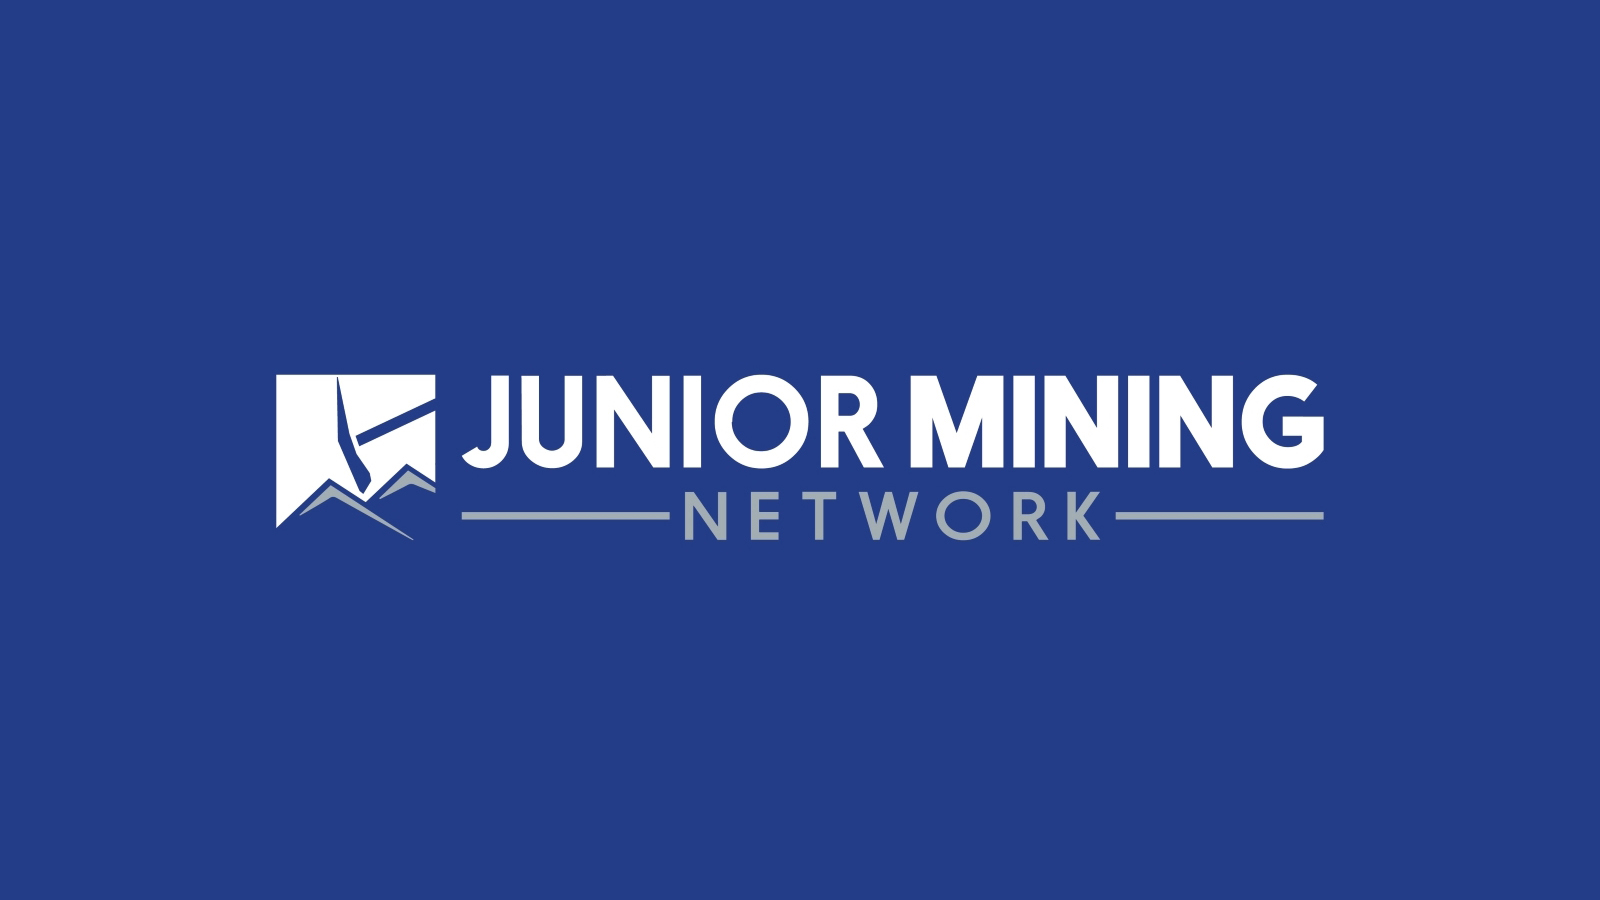 GR Silver Mining News and Stock Quote (TSX.V: GRSL) - Junior